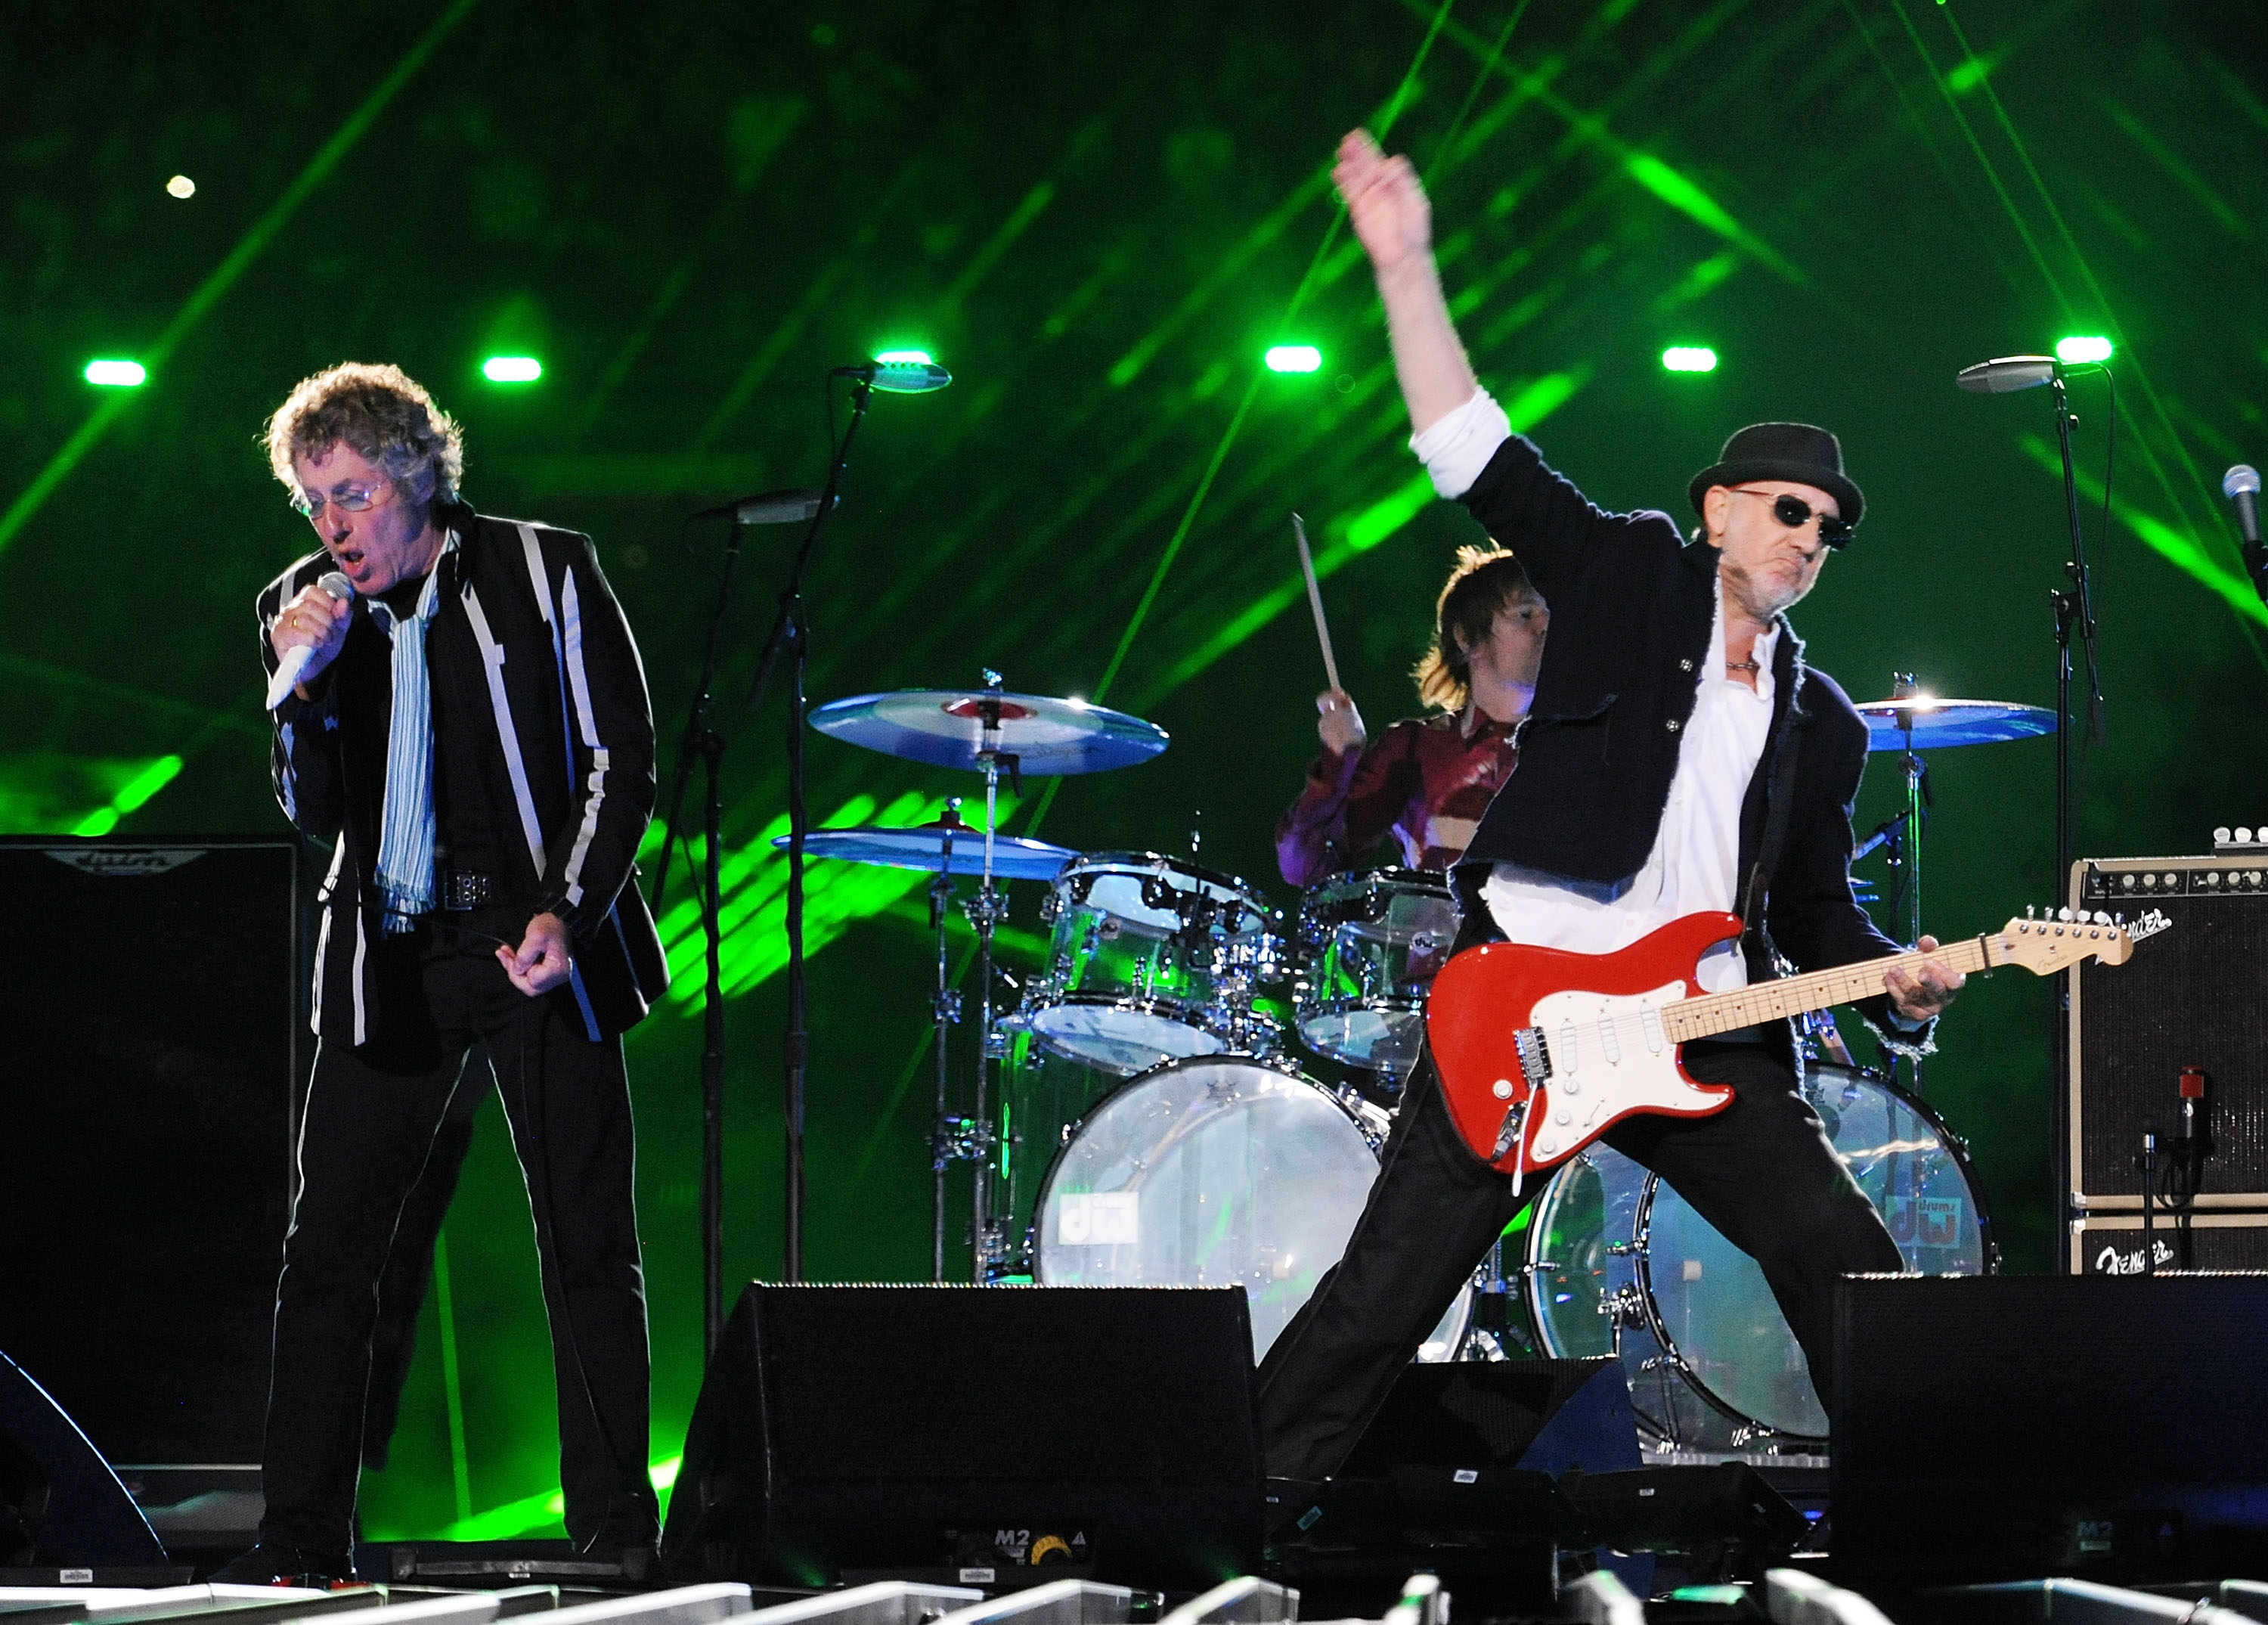 The Who perform during Super Bowl XLIV on Feb. 7, 2010 in Miami Gardens, Fla.